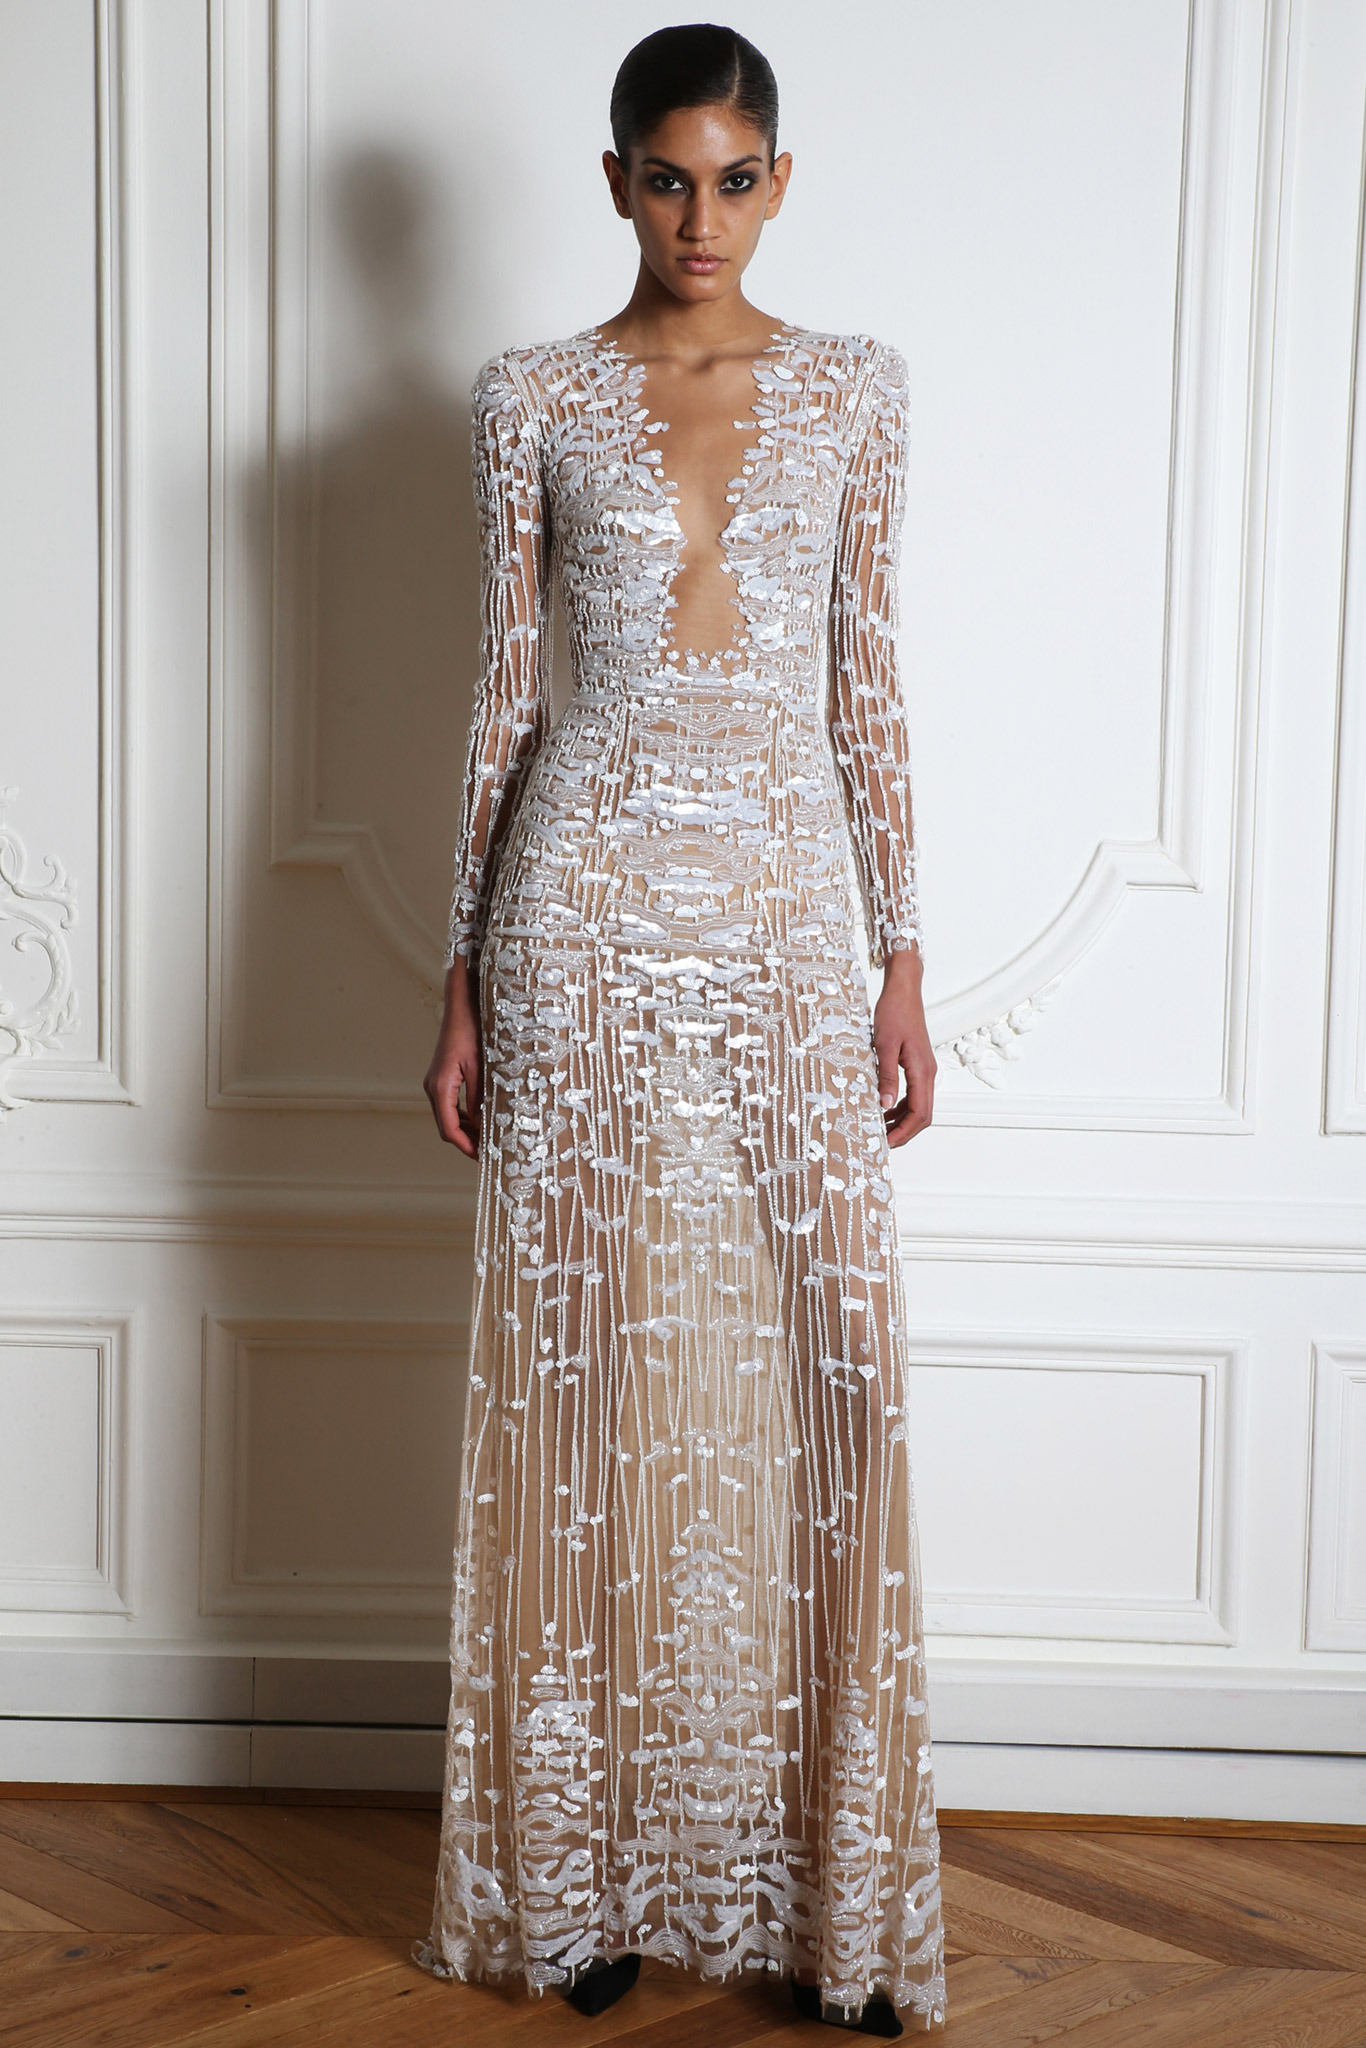 Zuhair Murad Fall/Winter 2014/2015 Ready to Wear Collection